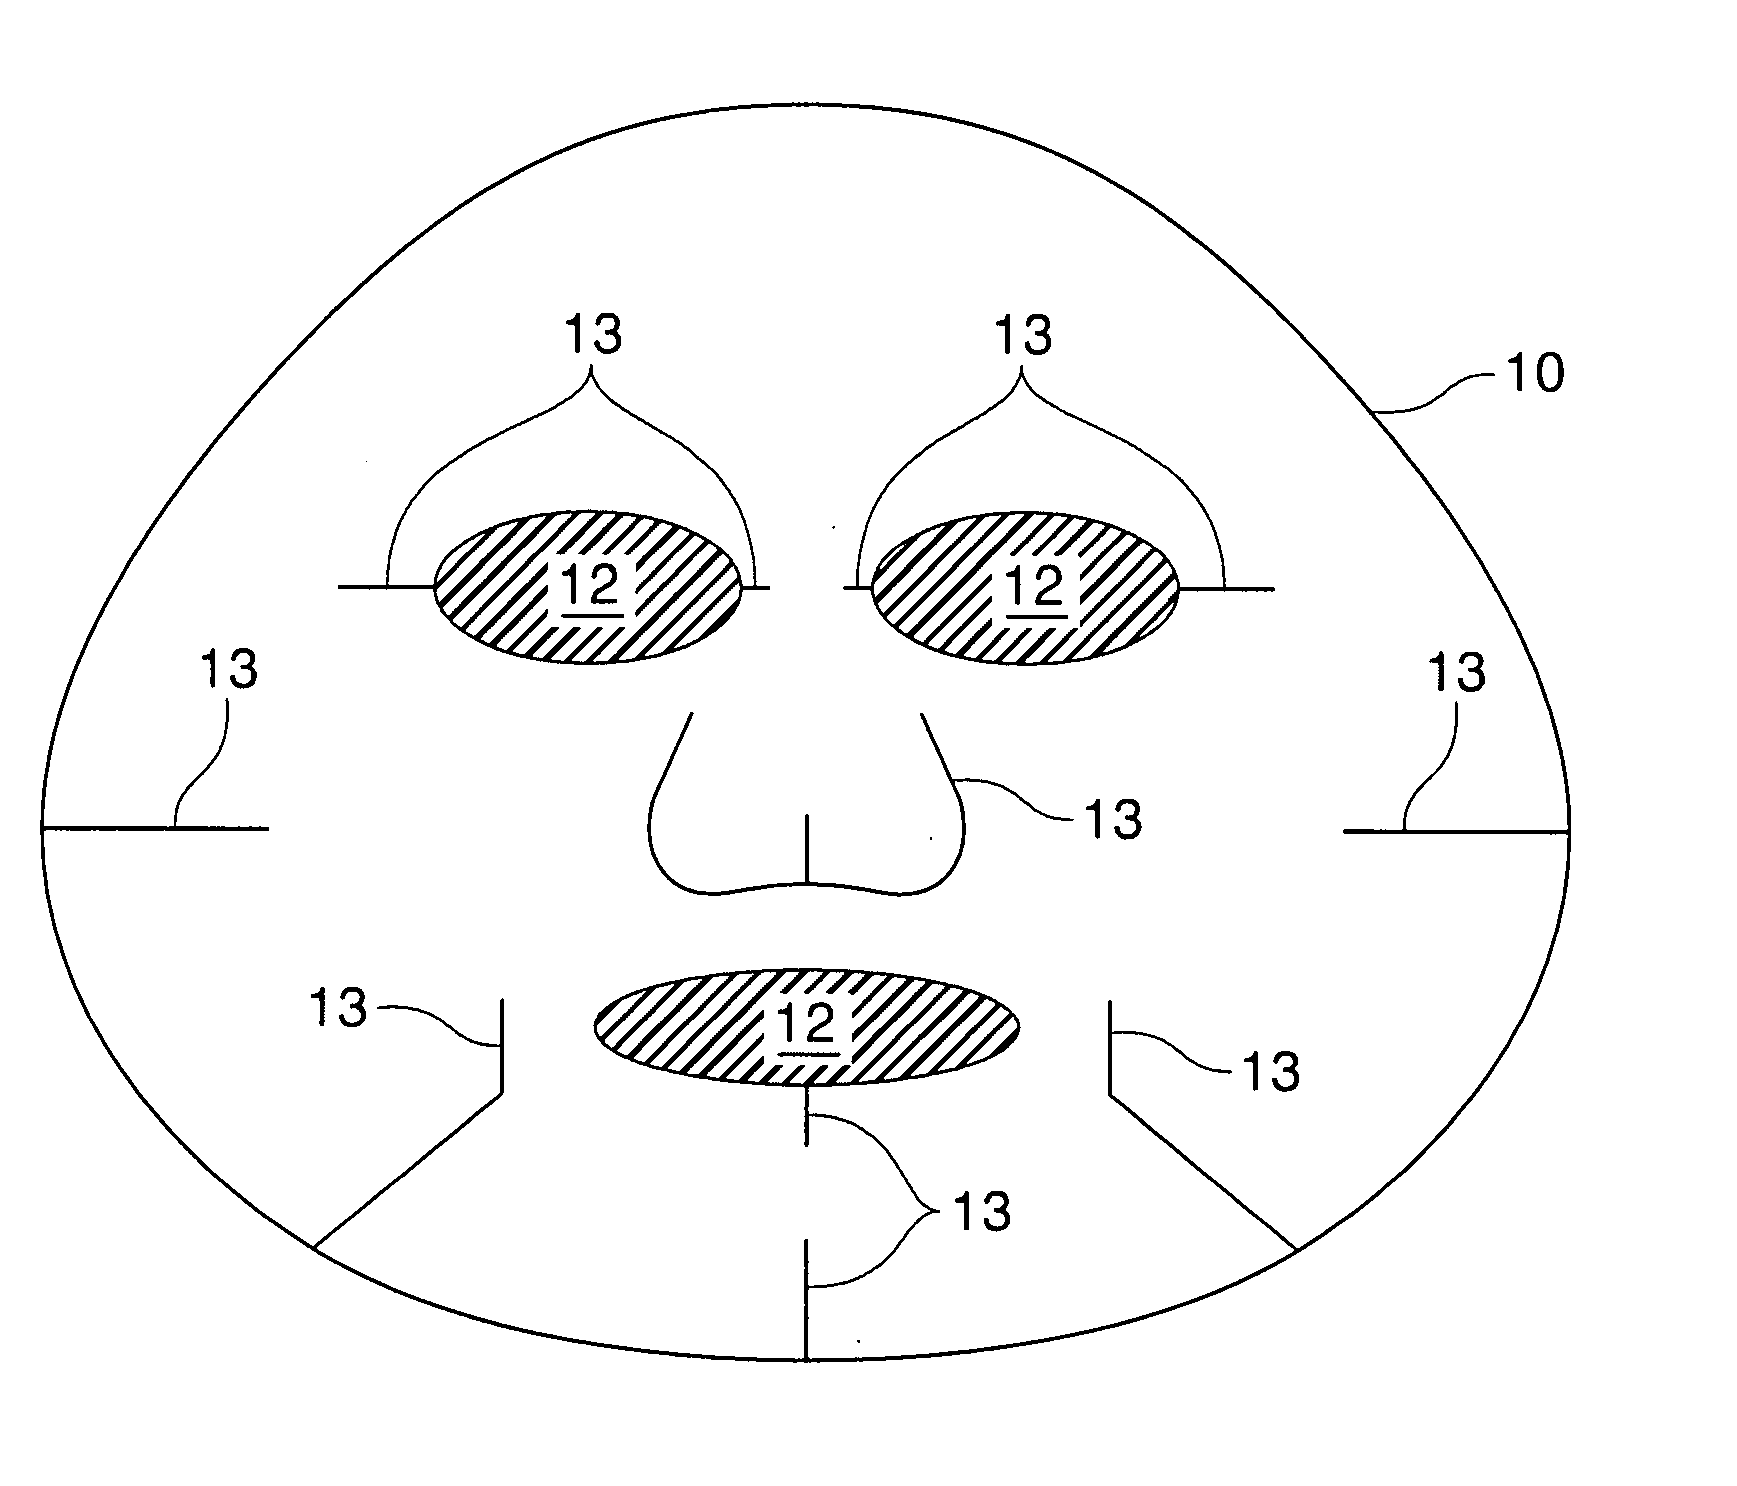 Treatment articles capable of delivering intensive care and overall treatment simultaneously